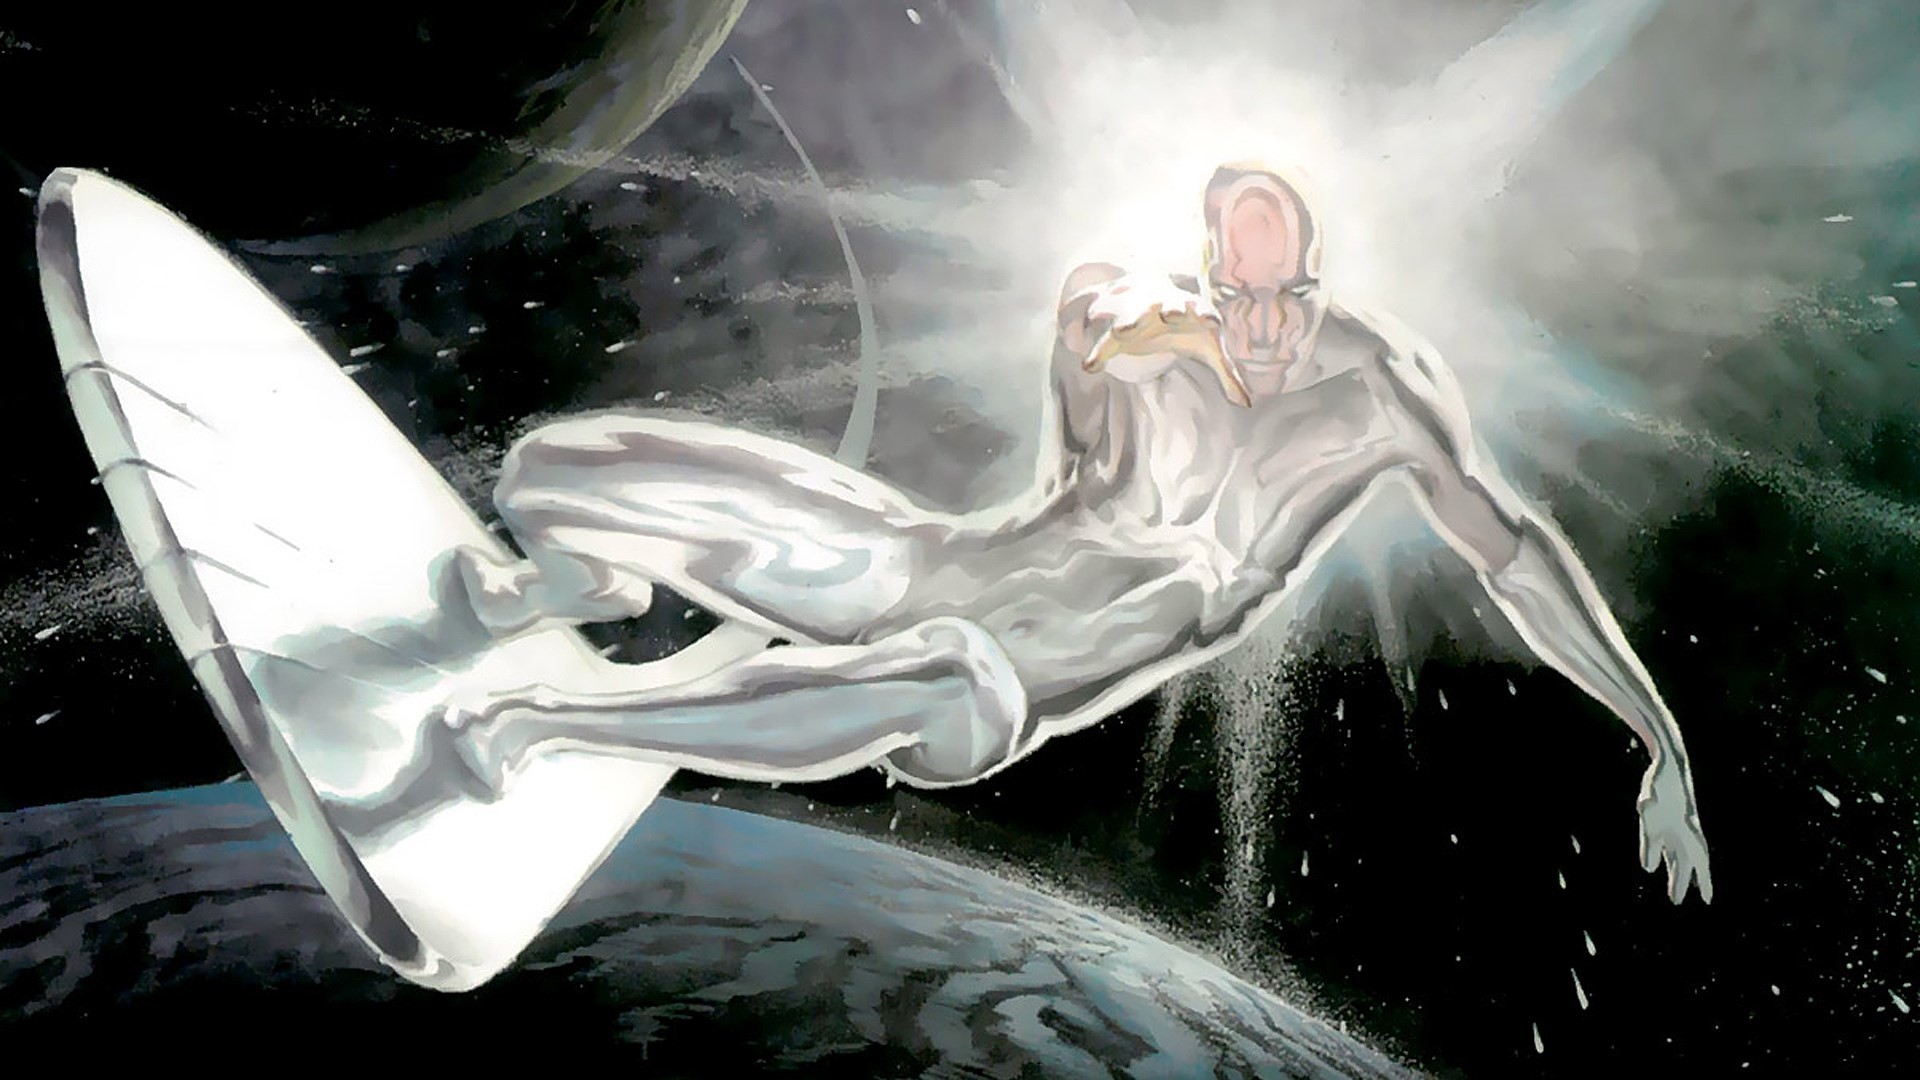 Free screensaver wallpapers for silver surfer